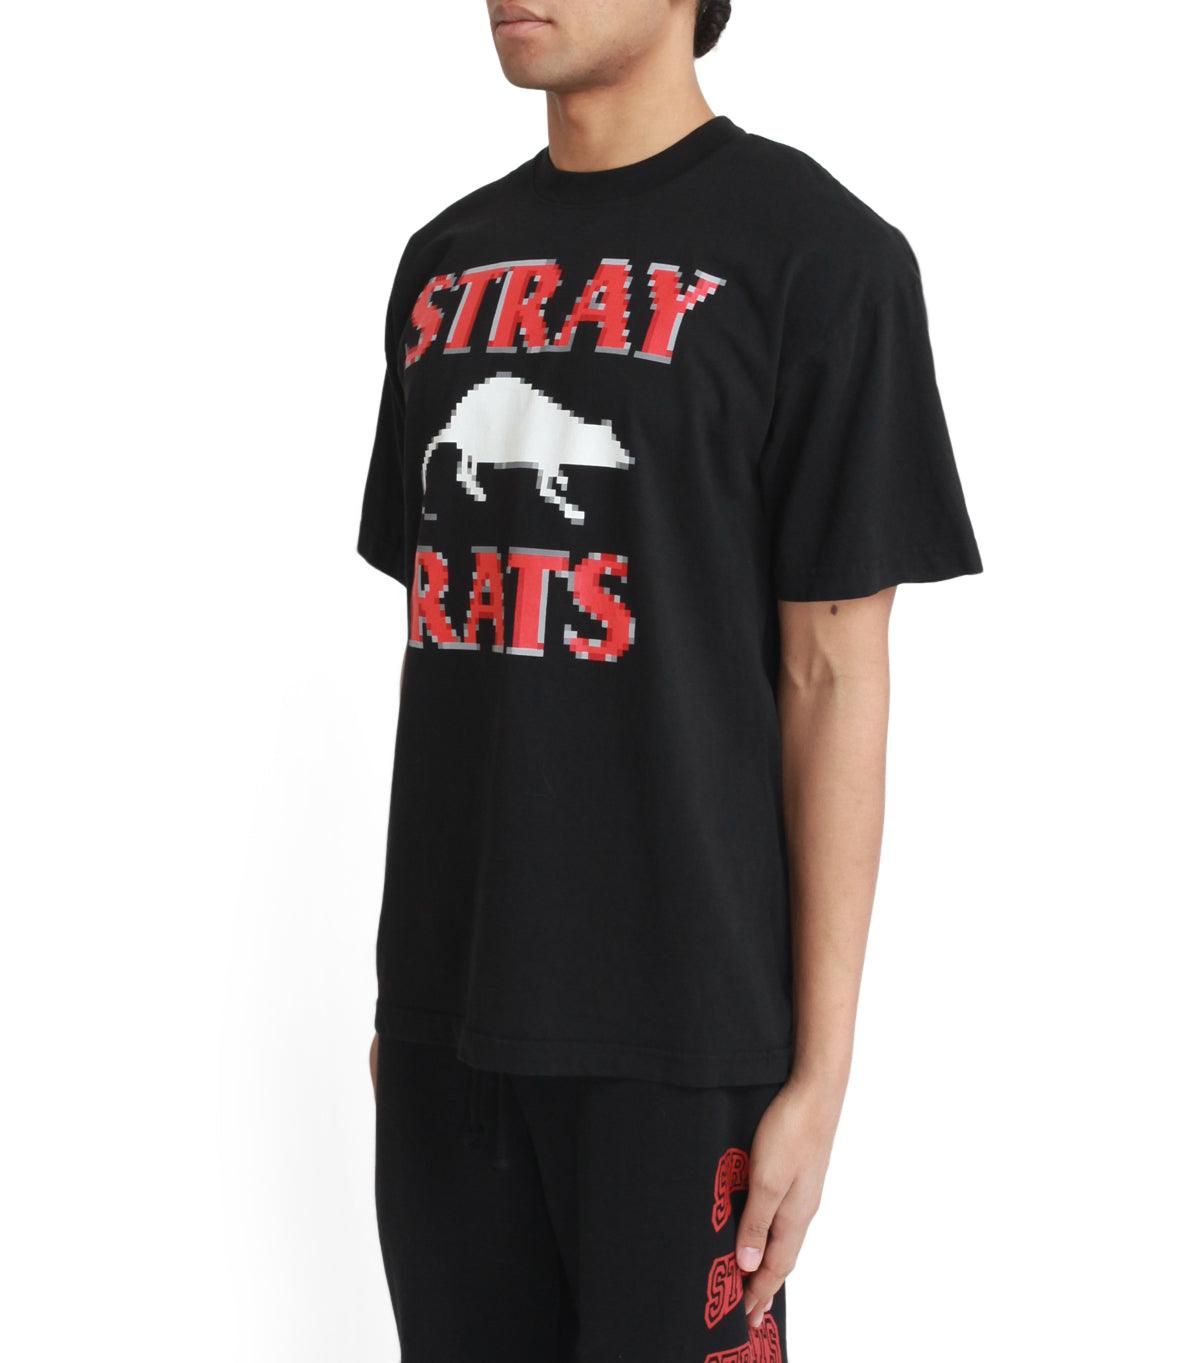 Stray Rats Pixel Roedenticide Tee Black | SOMEWHERE